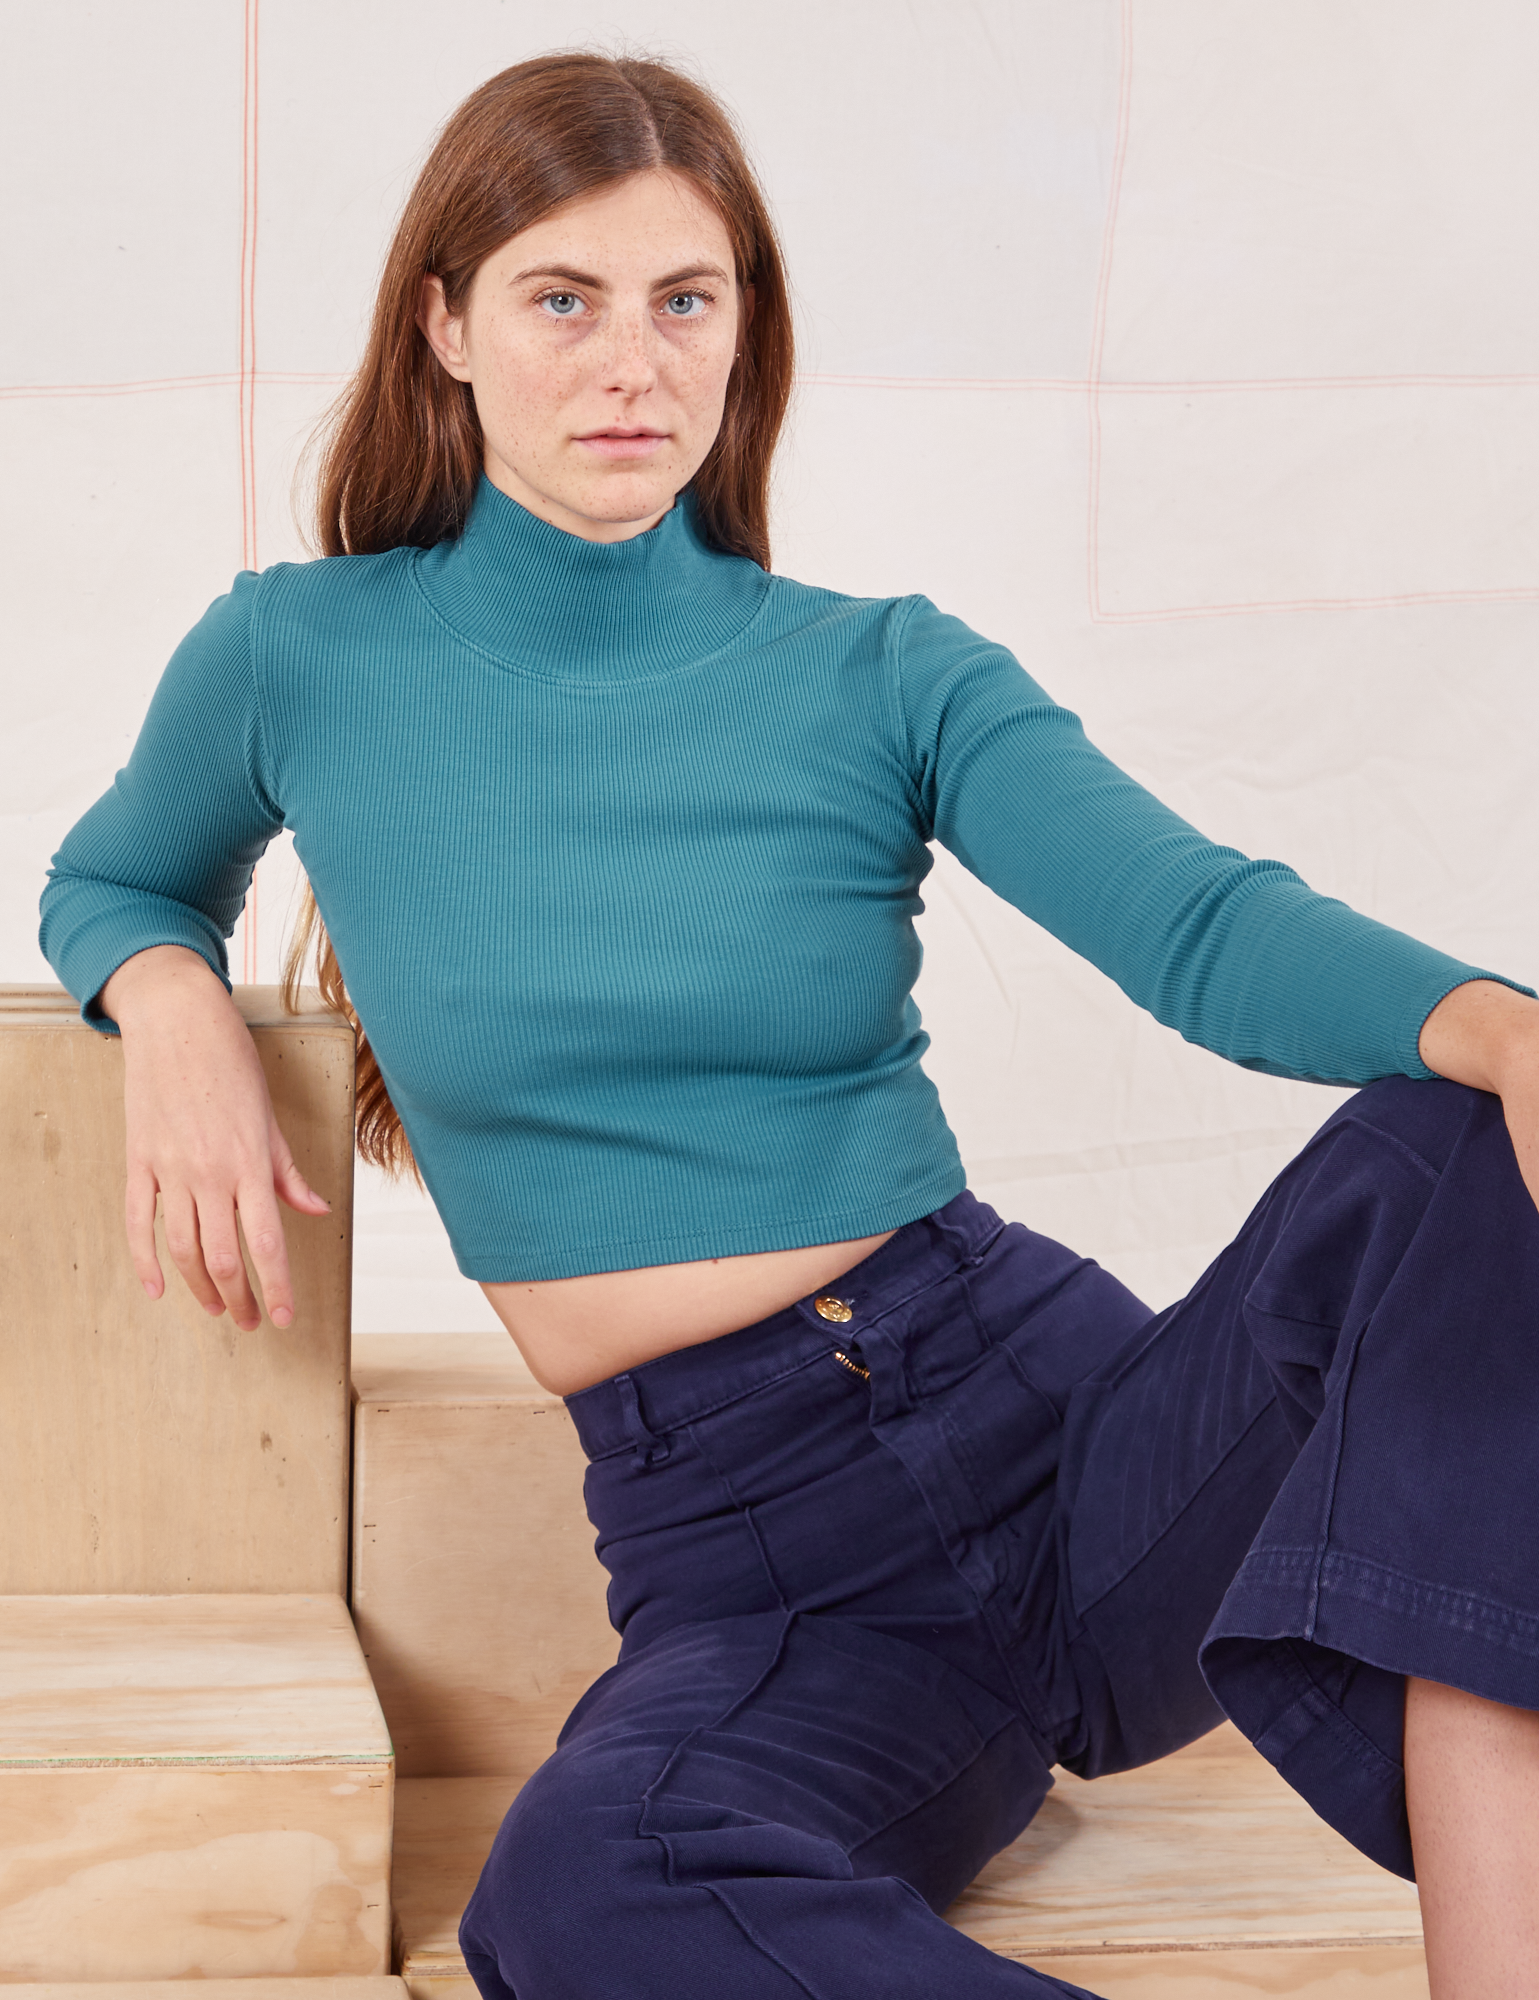 Scarlett is 5&#39;9&quot; and wearing P Essential Turtleneck in Marine Blue paired with navy Western Pants